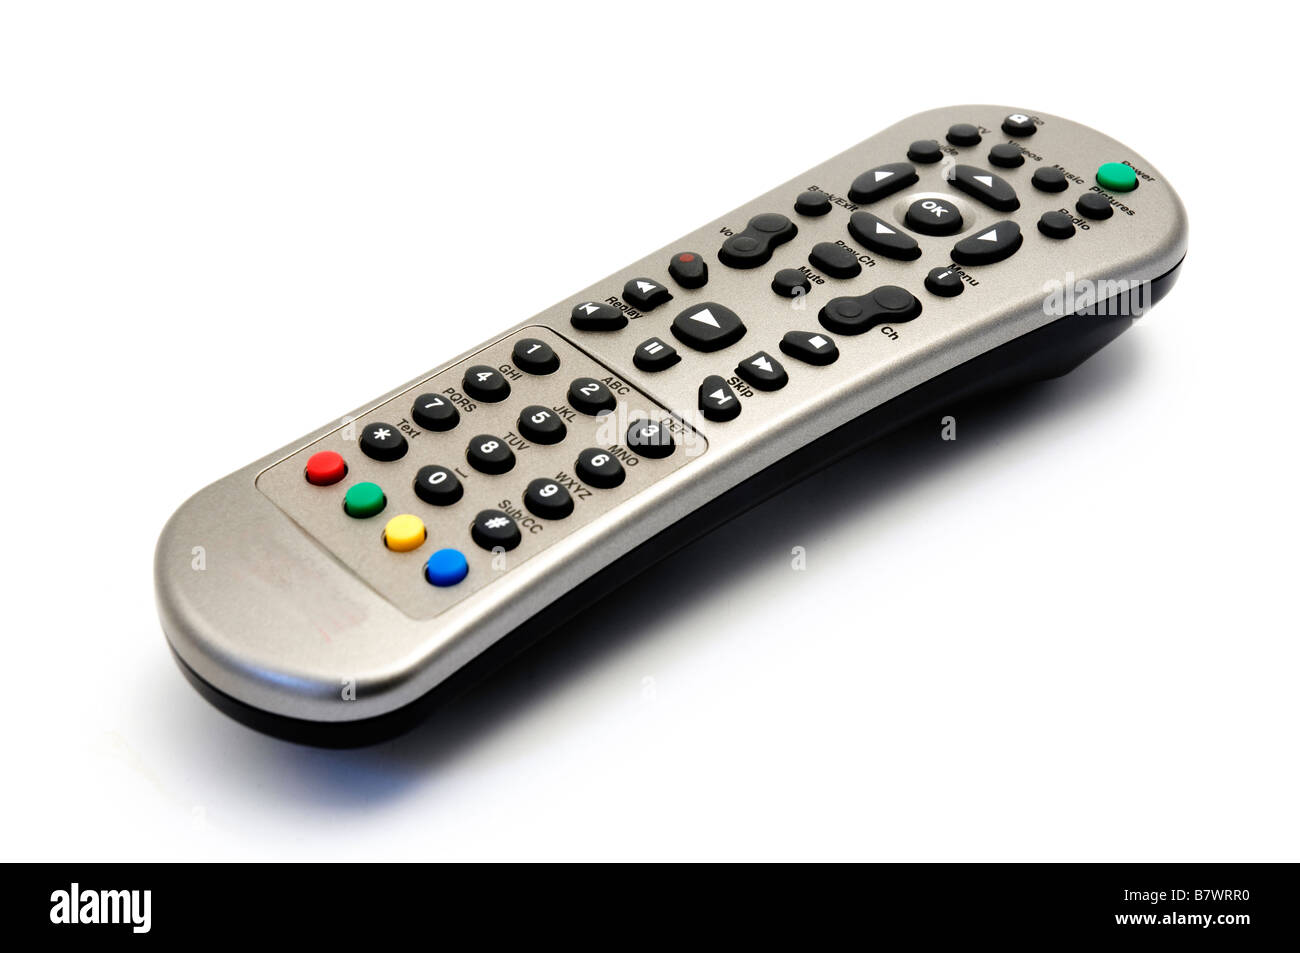 Tv remote control on a white background Stock Photo